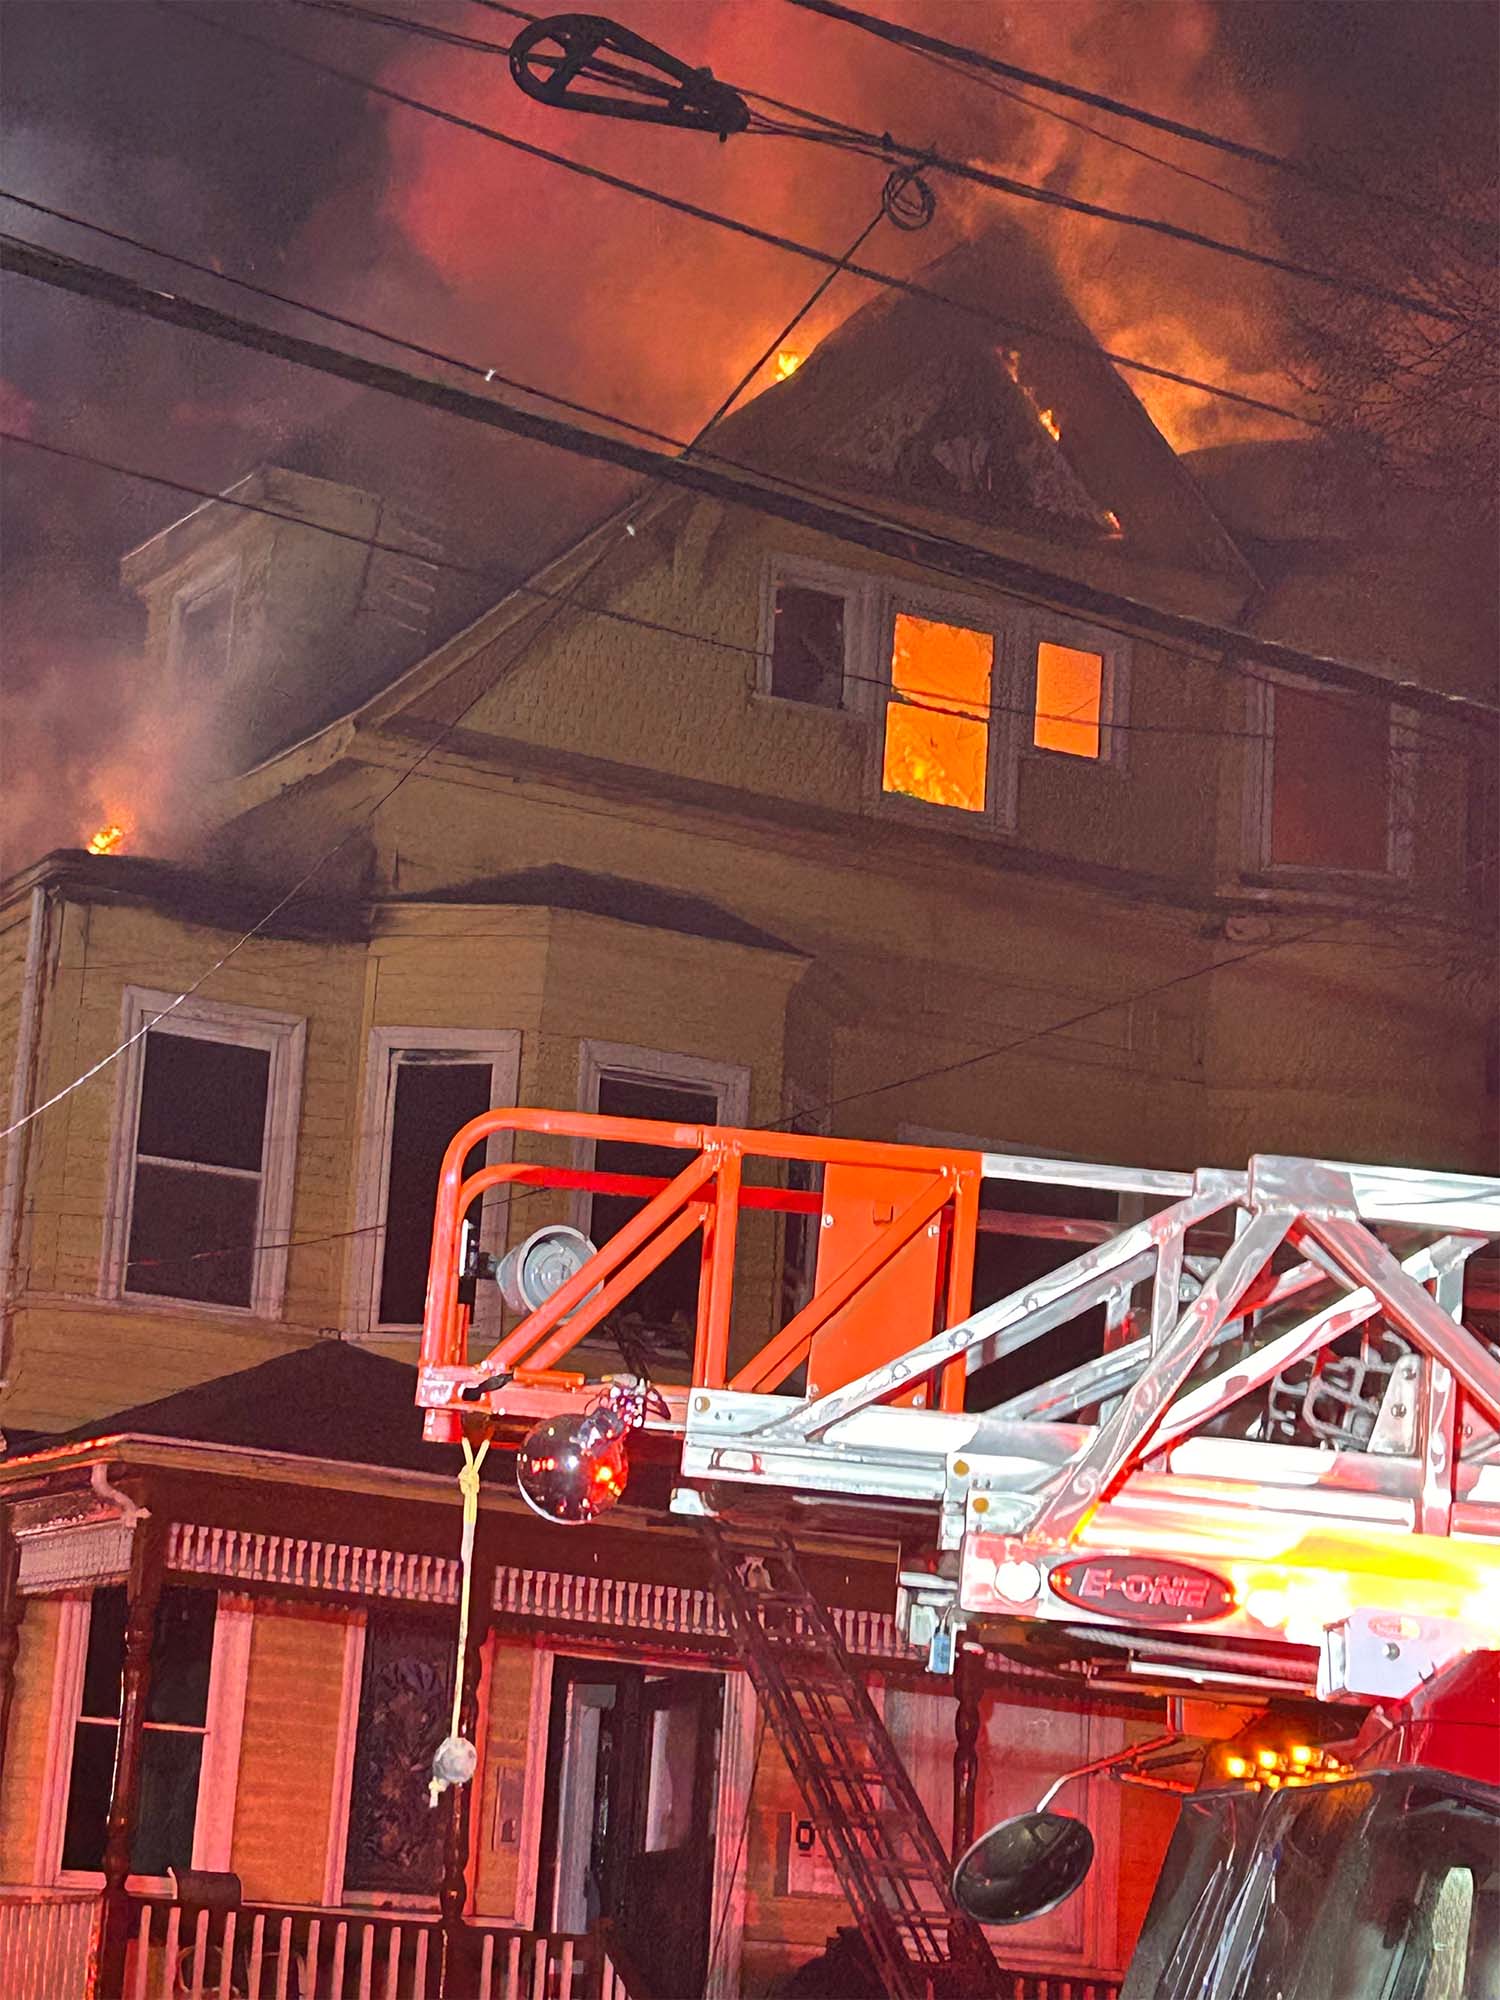 Photo: A house fire in Boston in March 2024, a house is visibly burning and there is a fire truck in front of the house